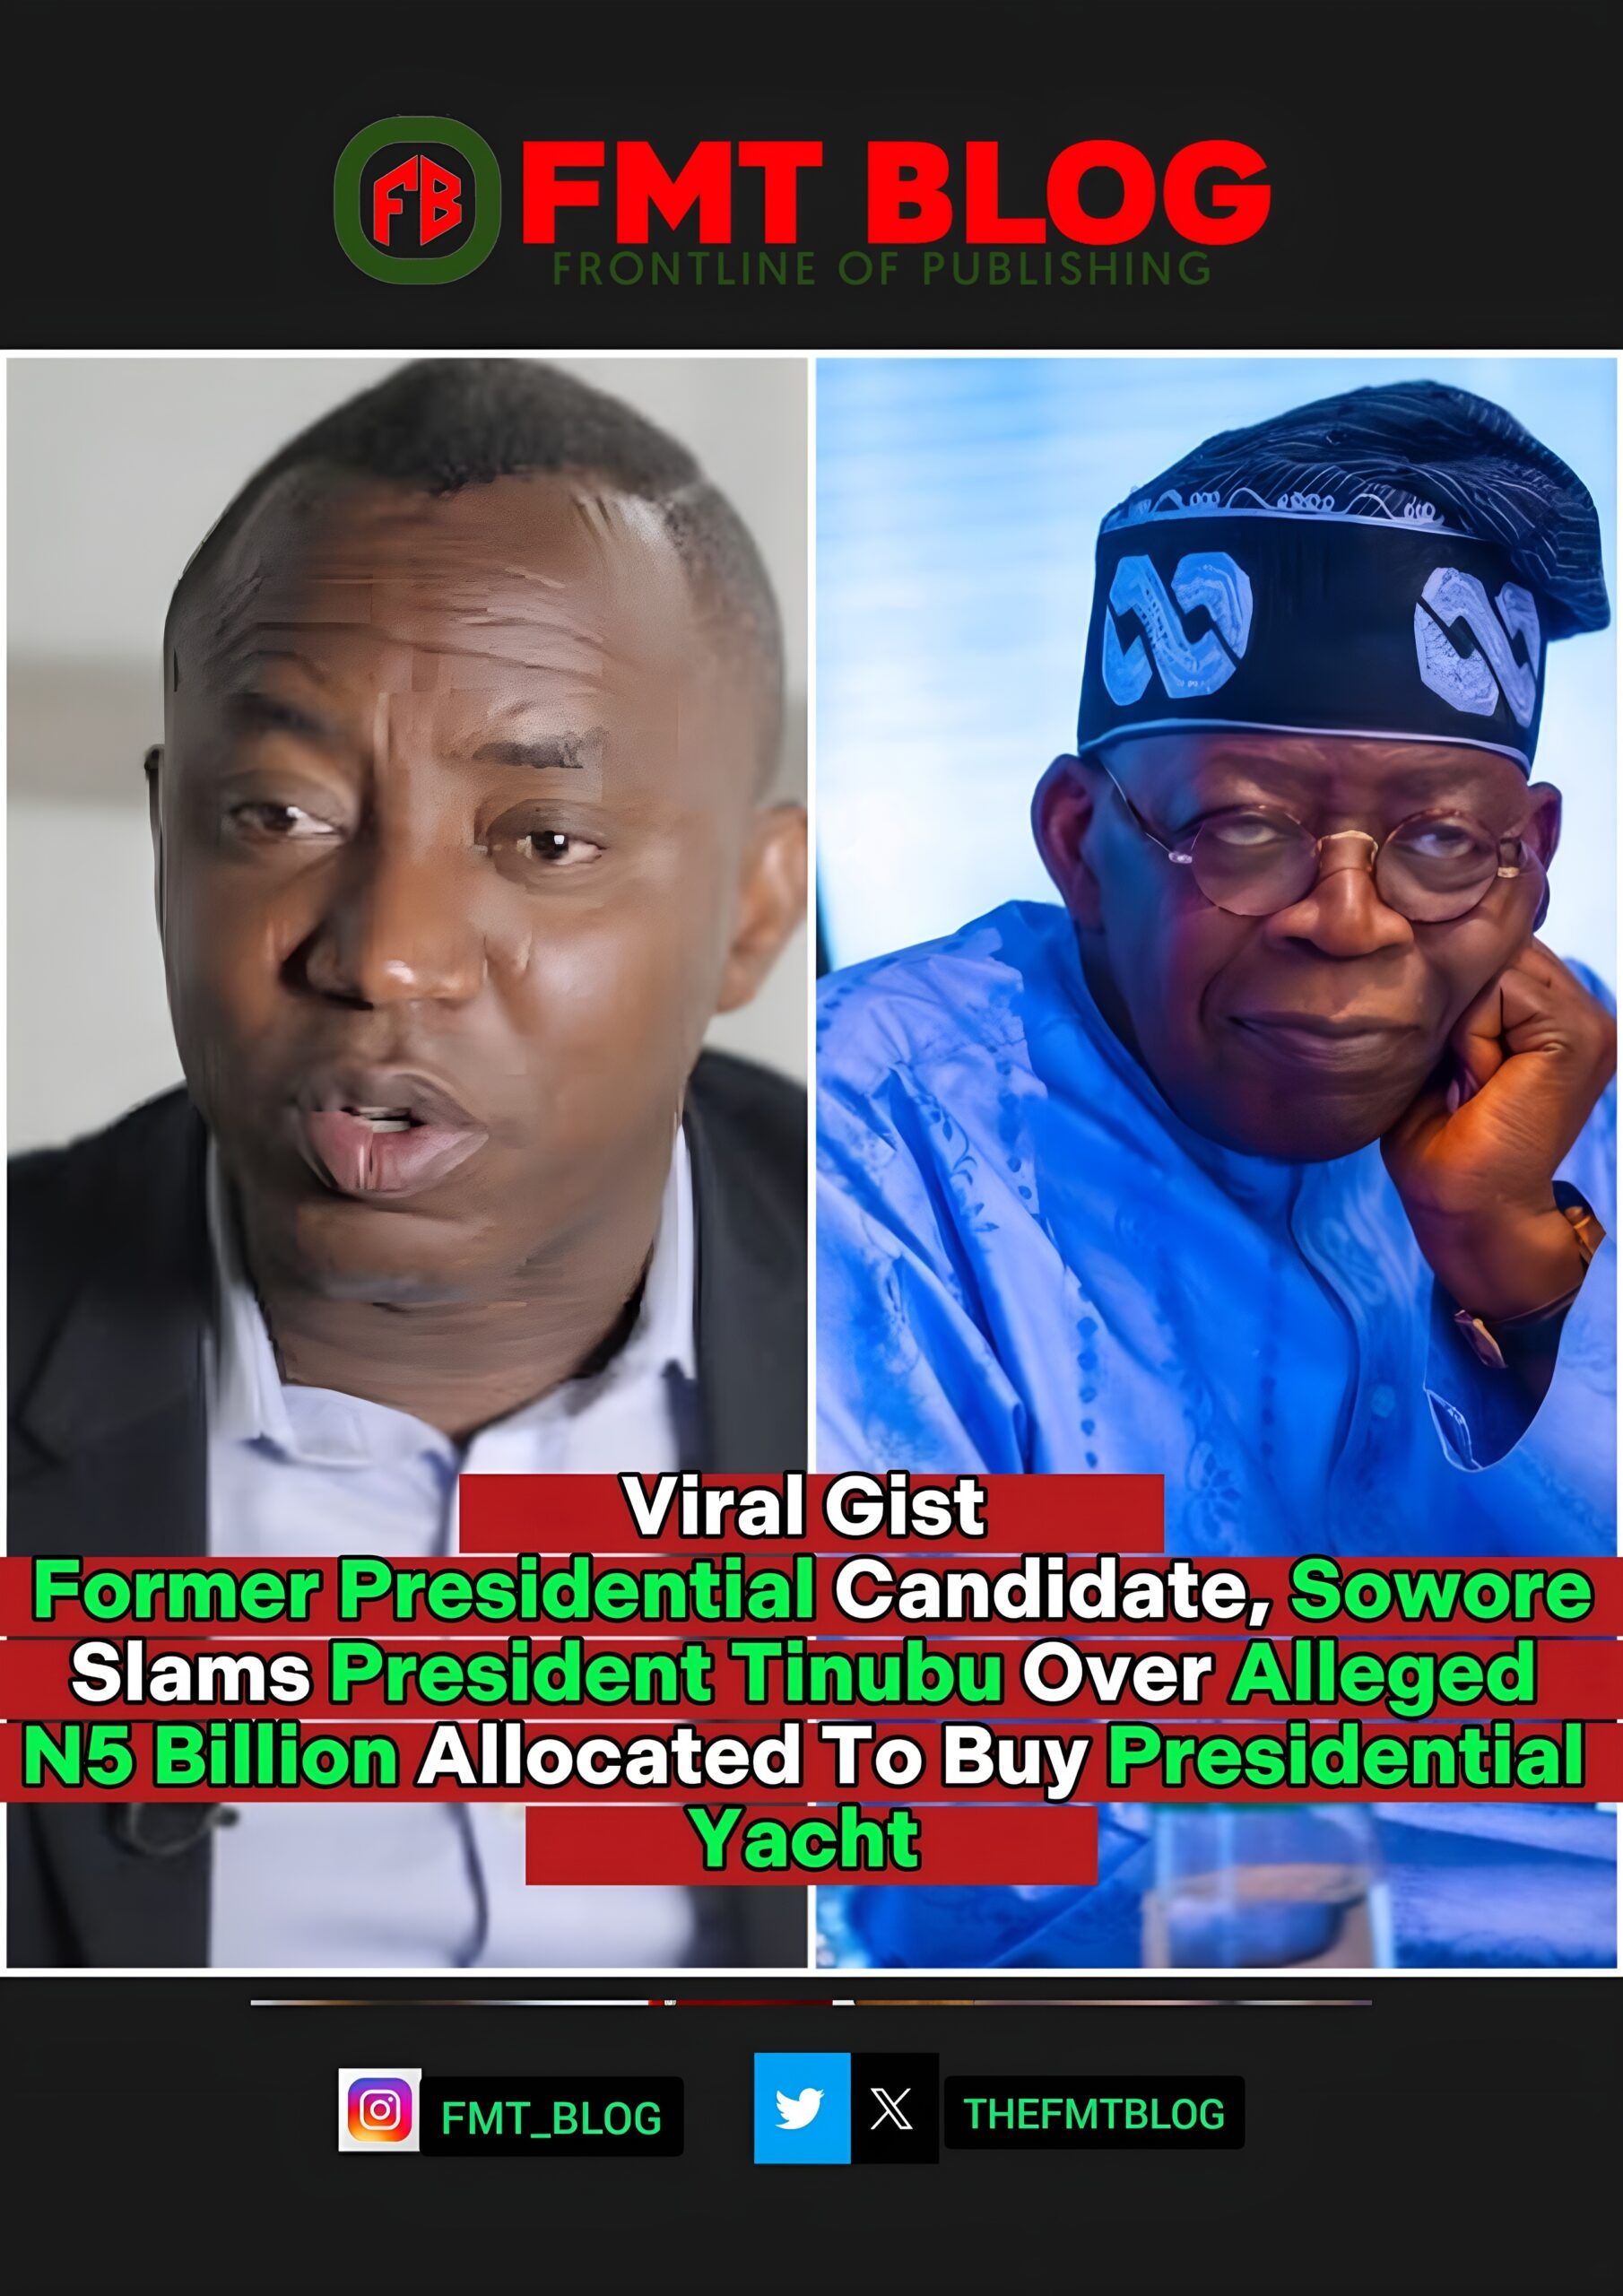 Former Presidential Candidate, Sowore Slams President Tinubu Over Alleged N5 Billion Allocated To Buy Presidential Yacht